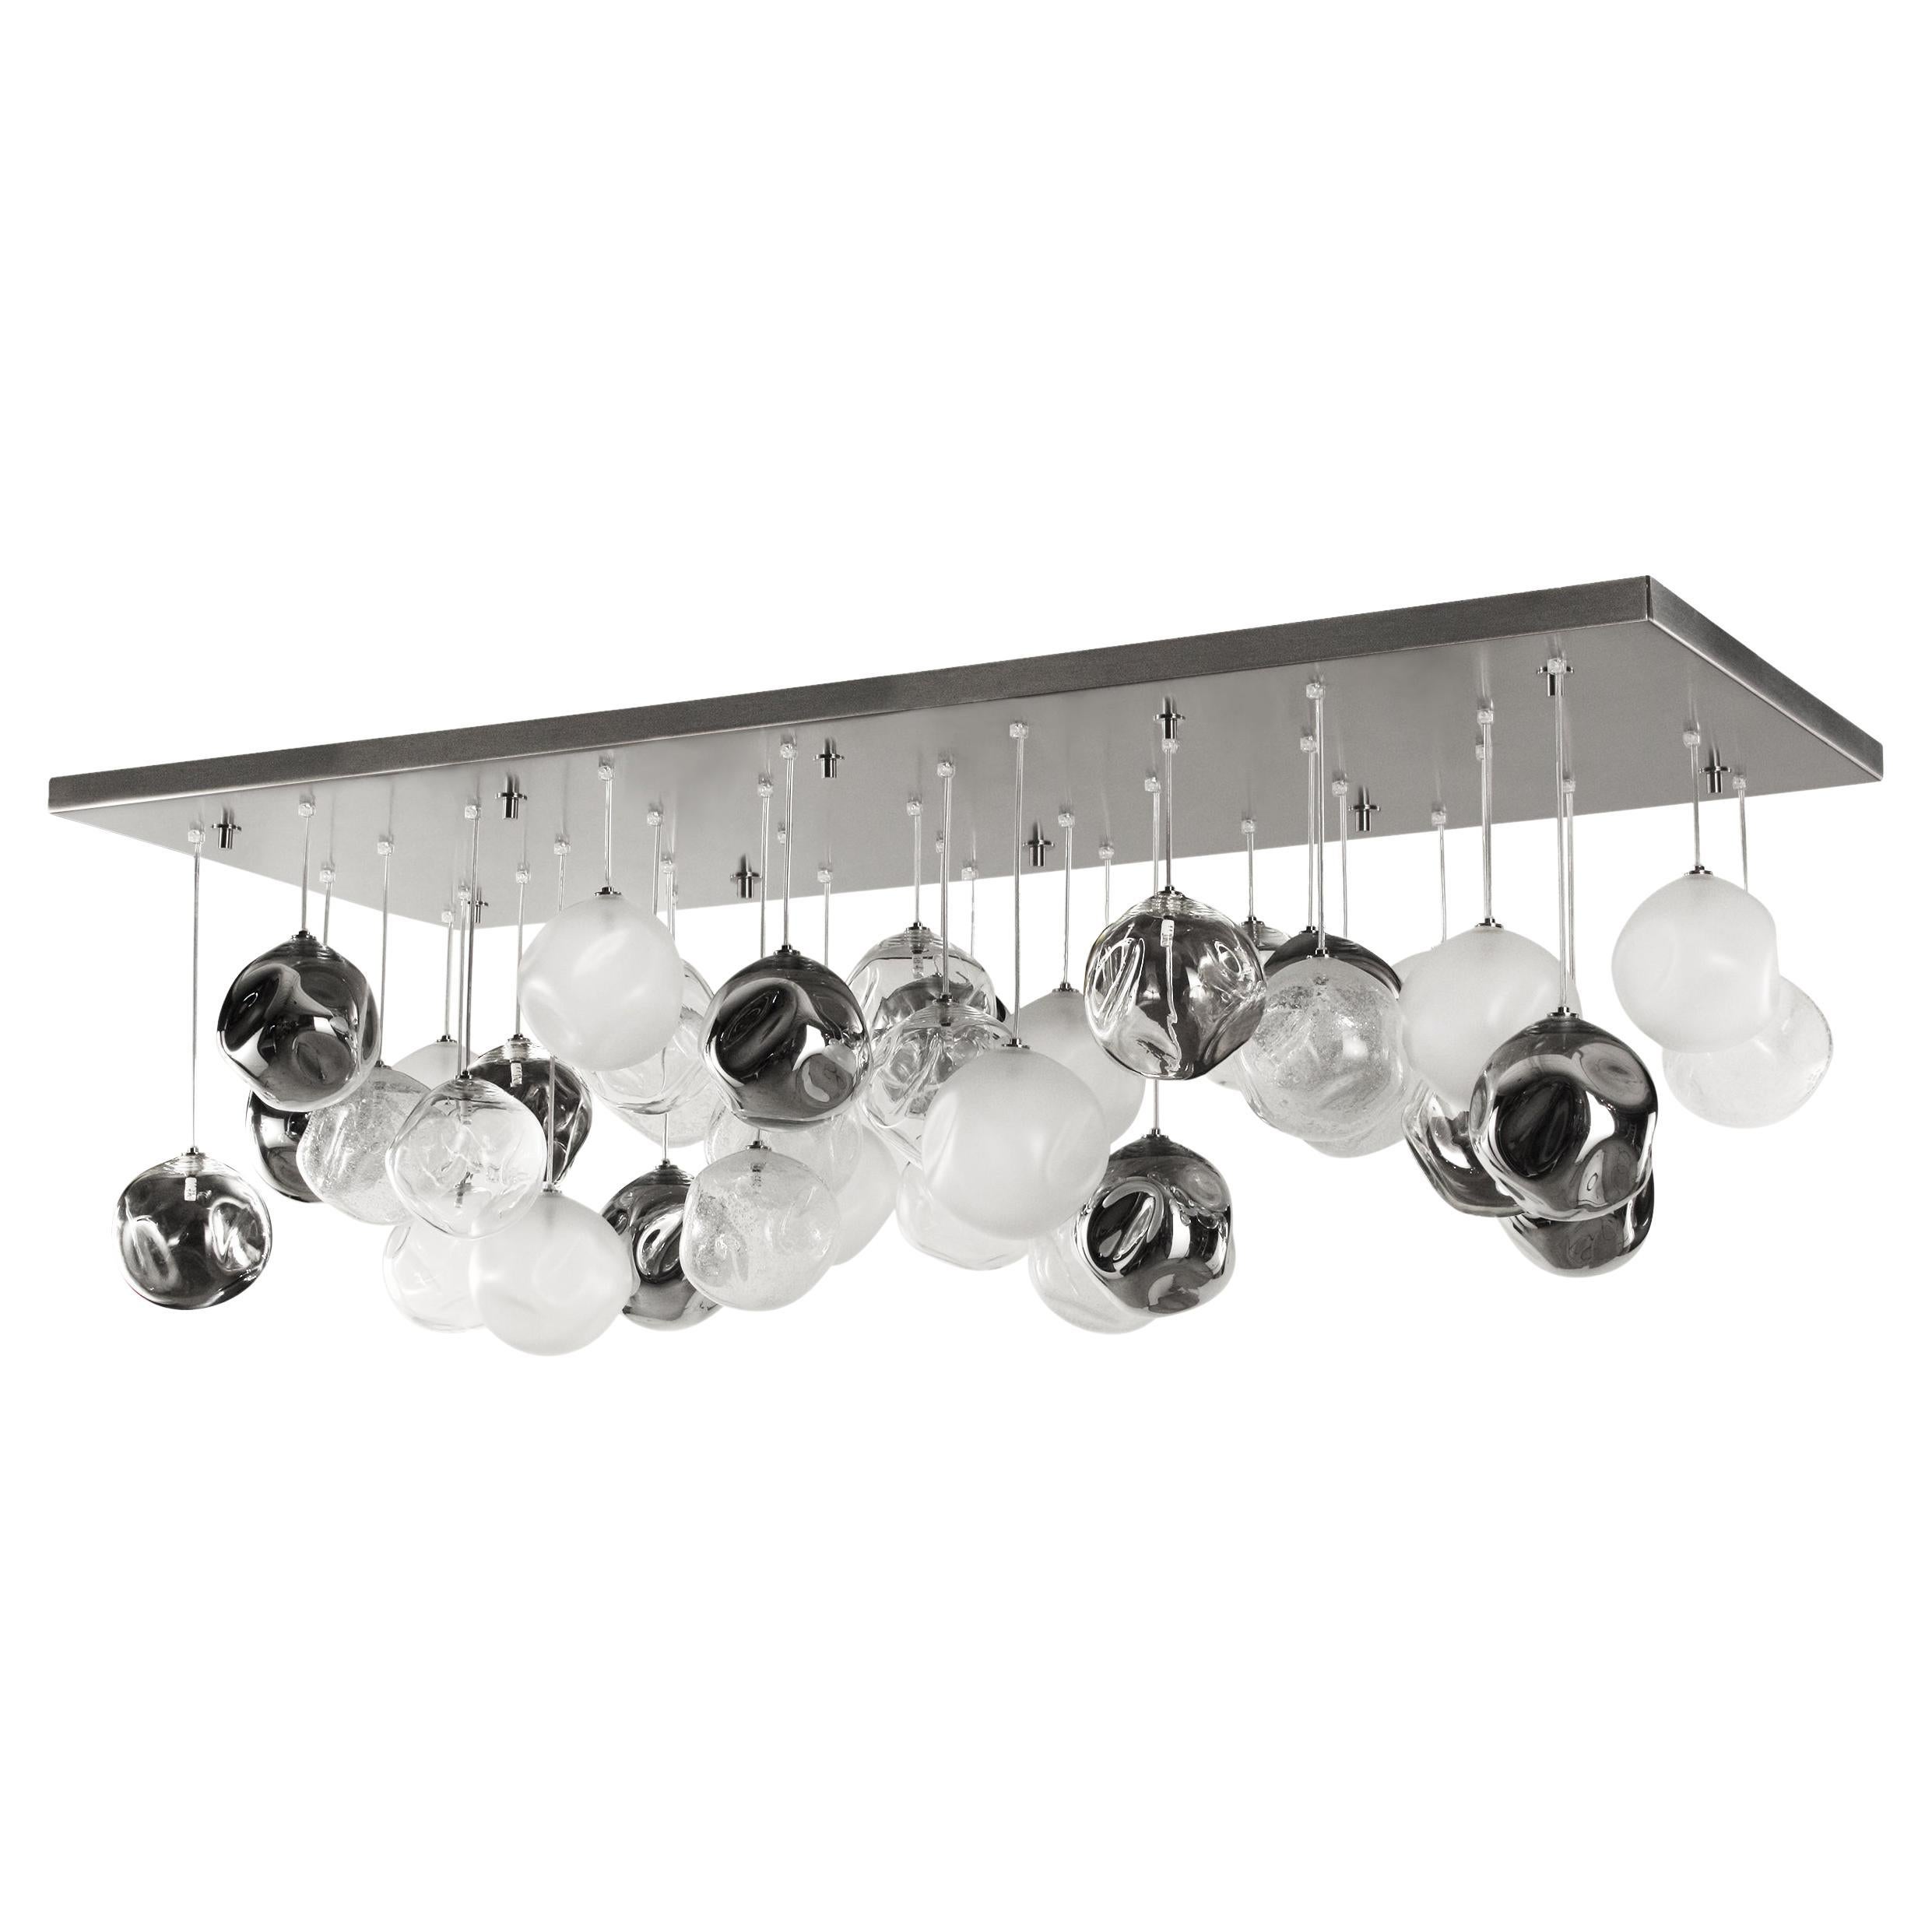 Artistic Ceiling Lighting, Spheres Clear, Satined Mirror, Pulegoso by Multiforme For Sale